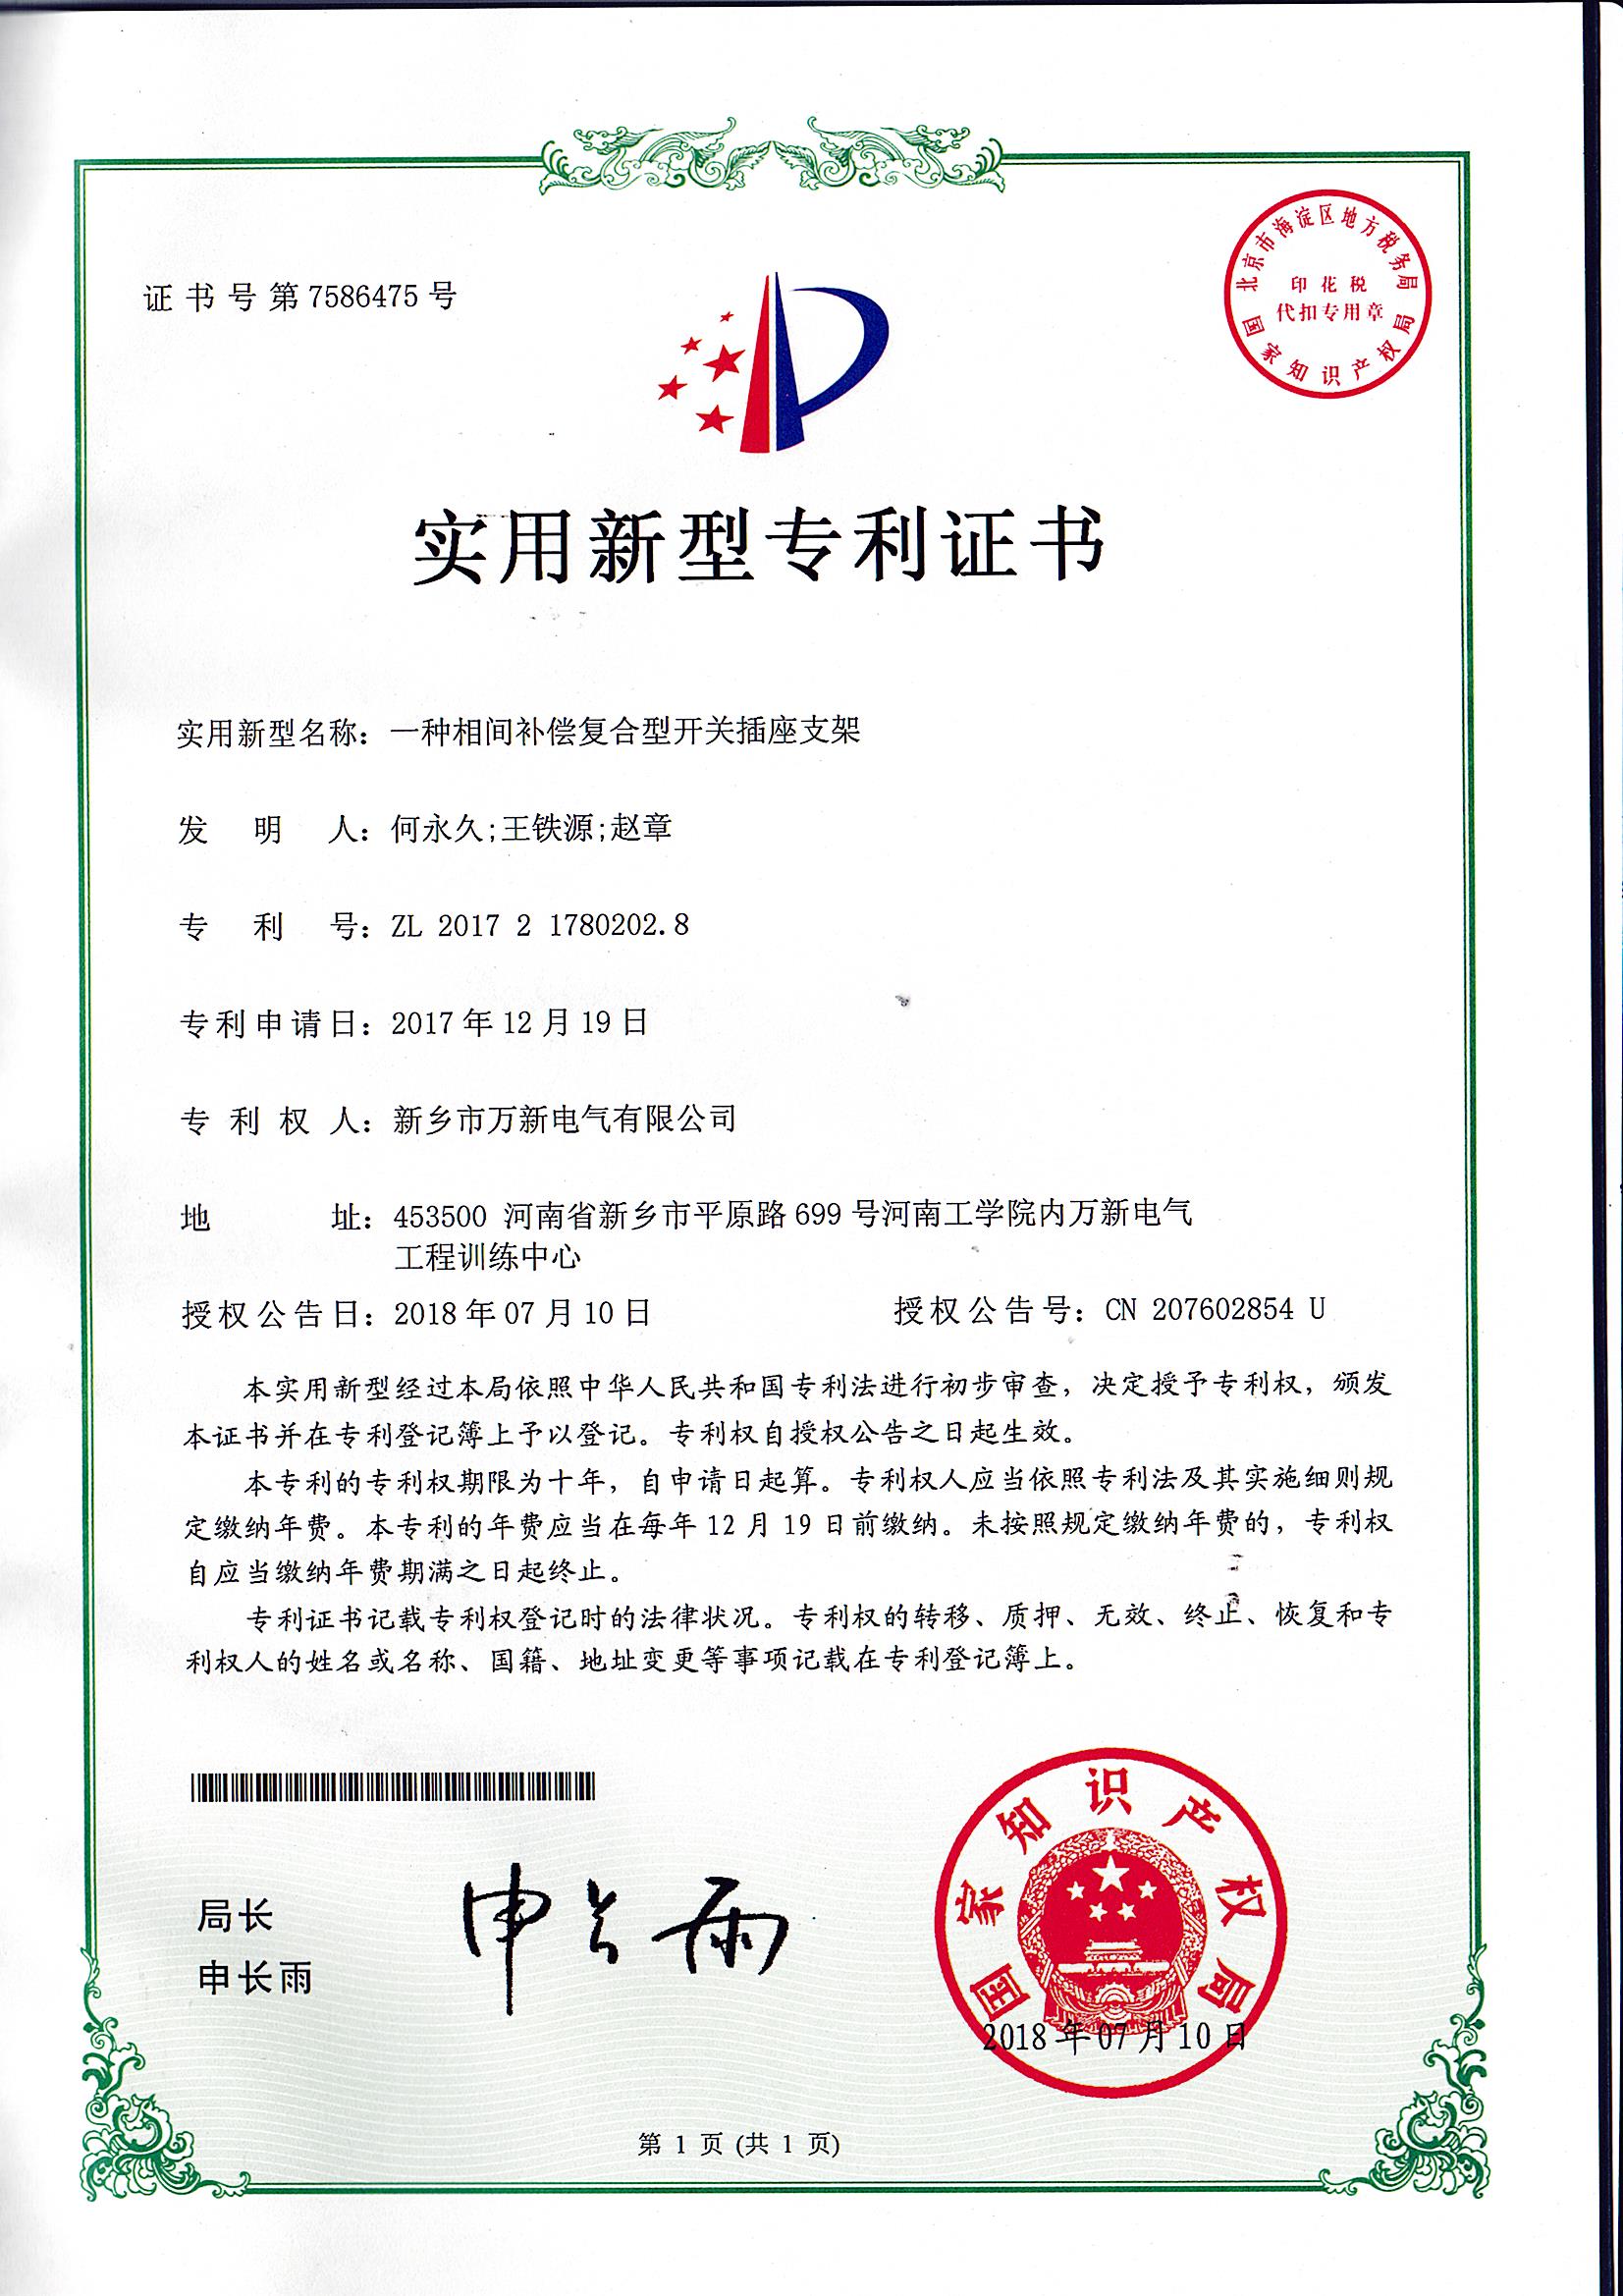 Wanxin product patent